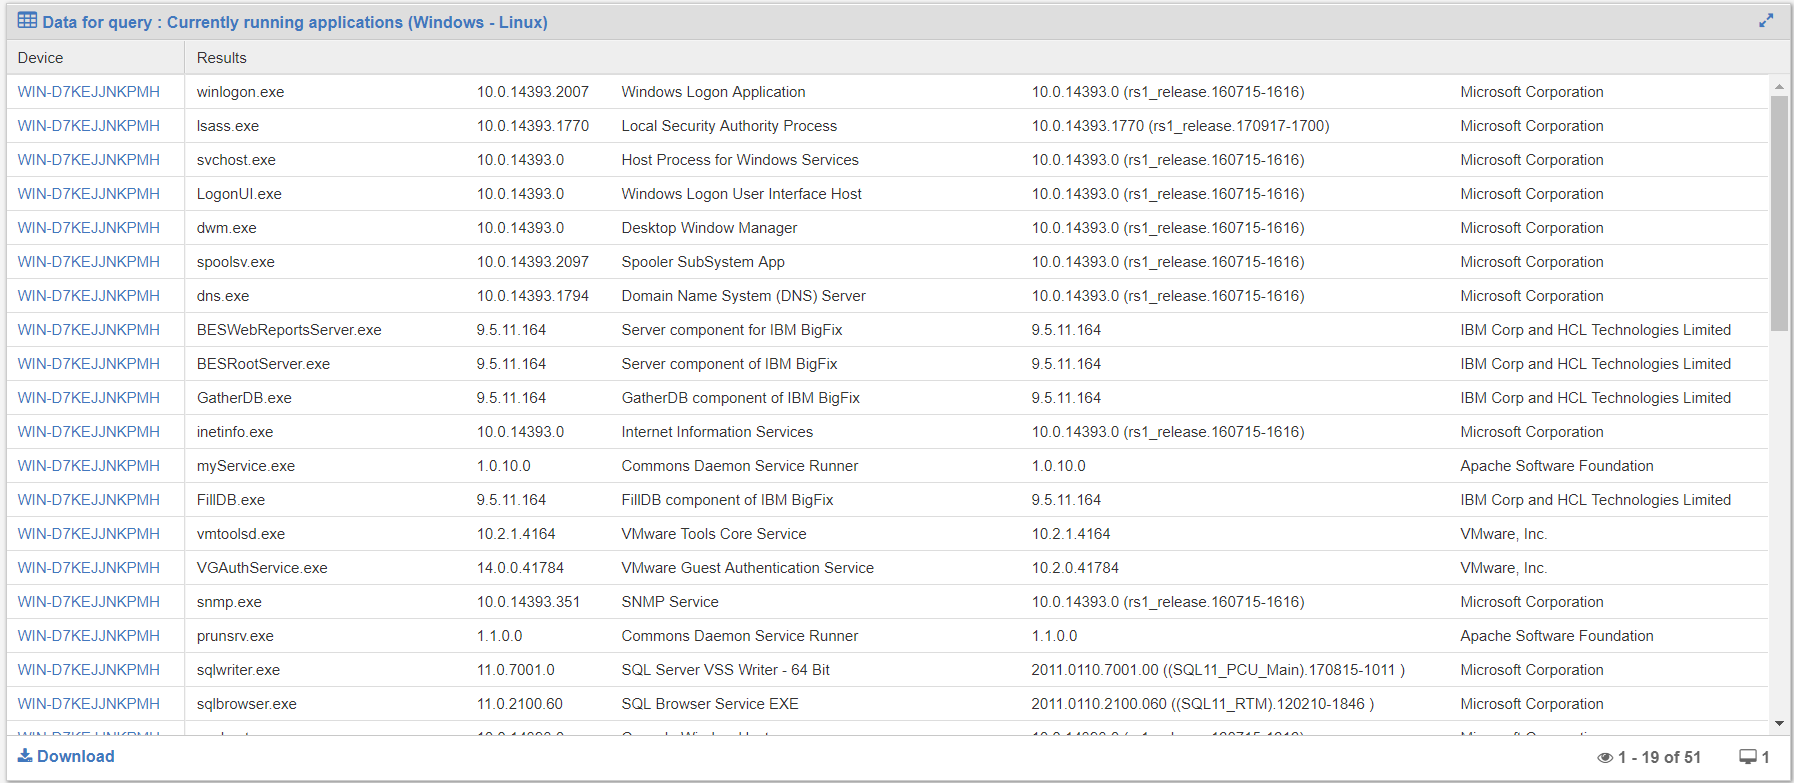 Image of Query Results screen.